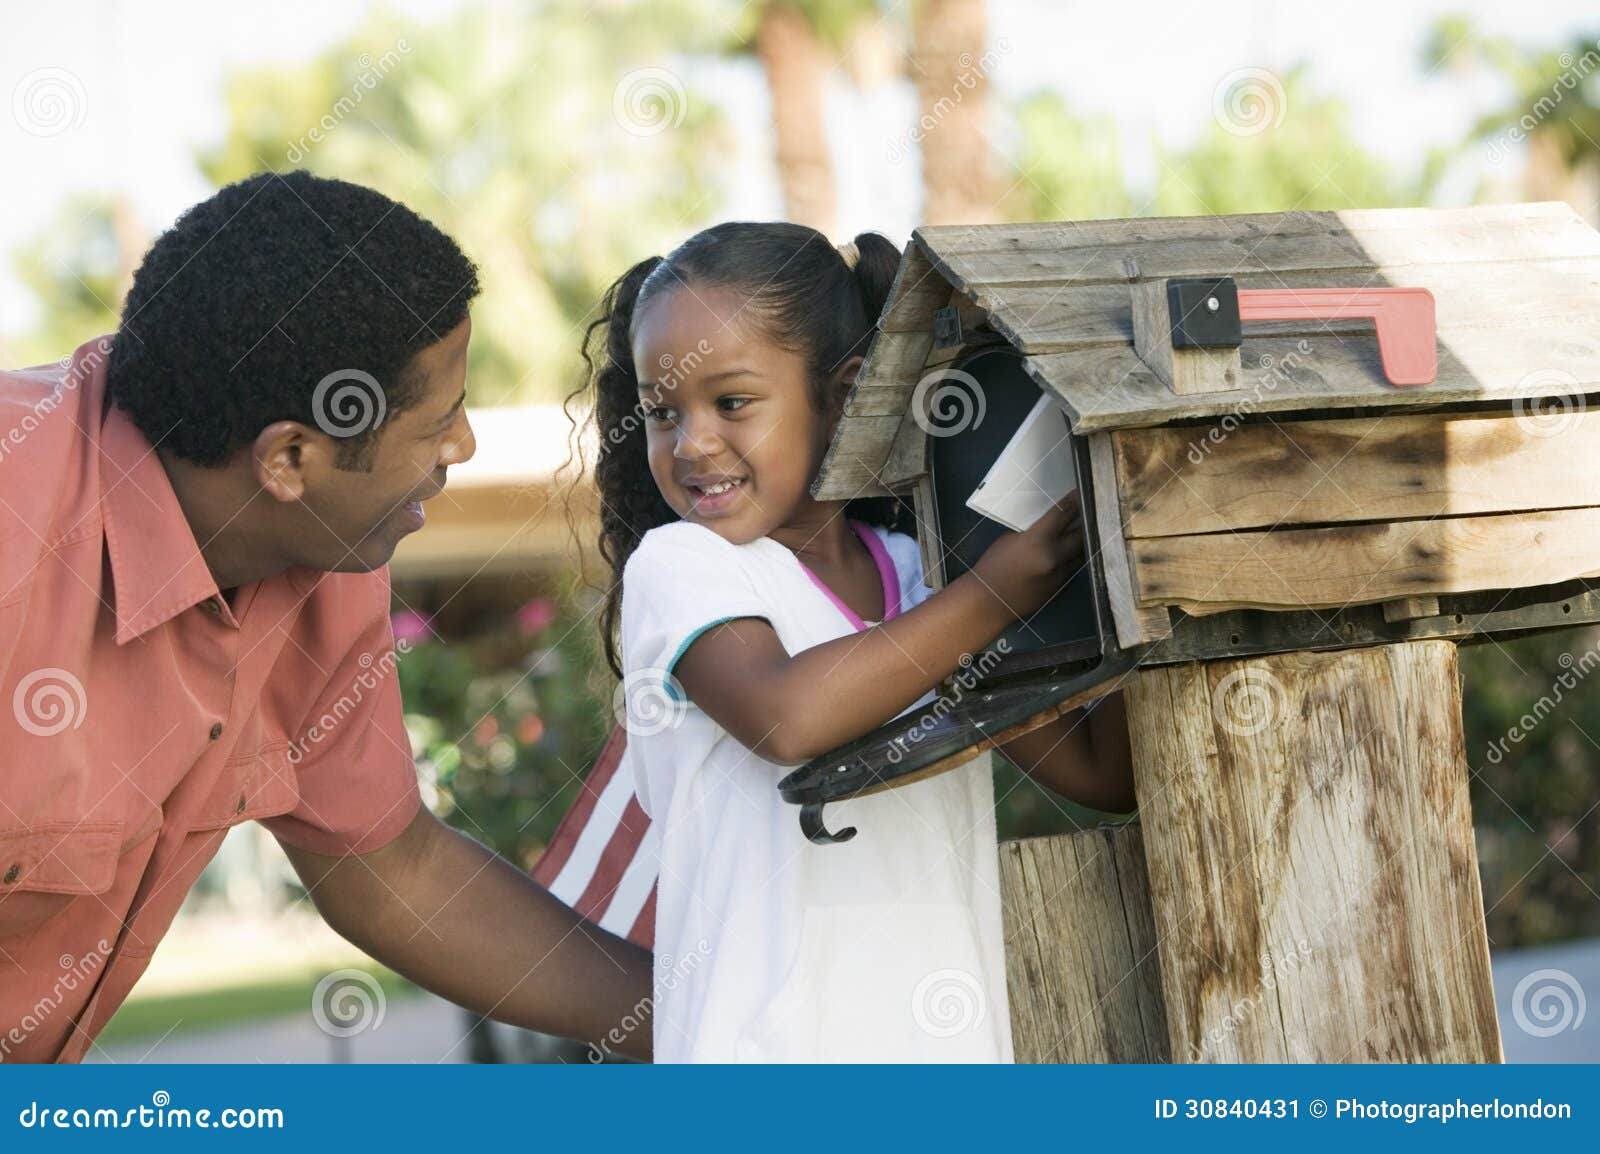 father and daughter checking mail at domestic mailbox